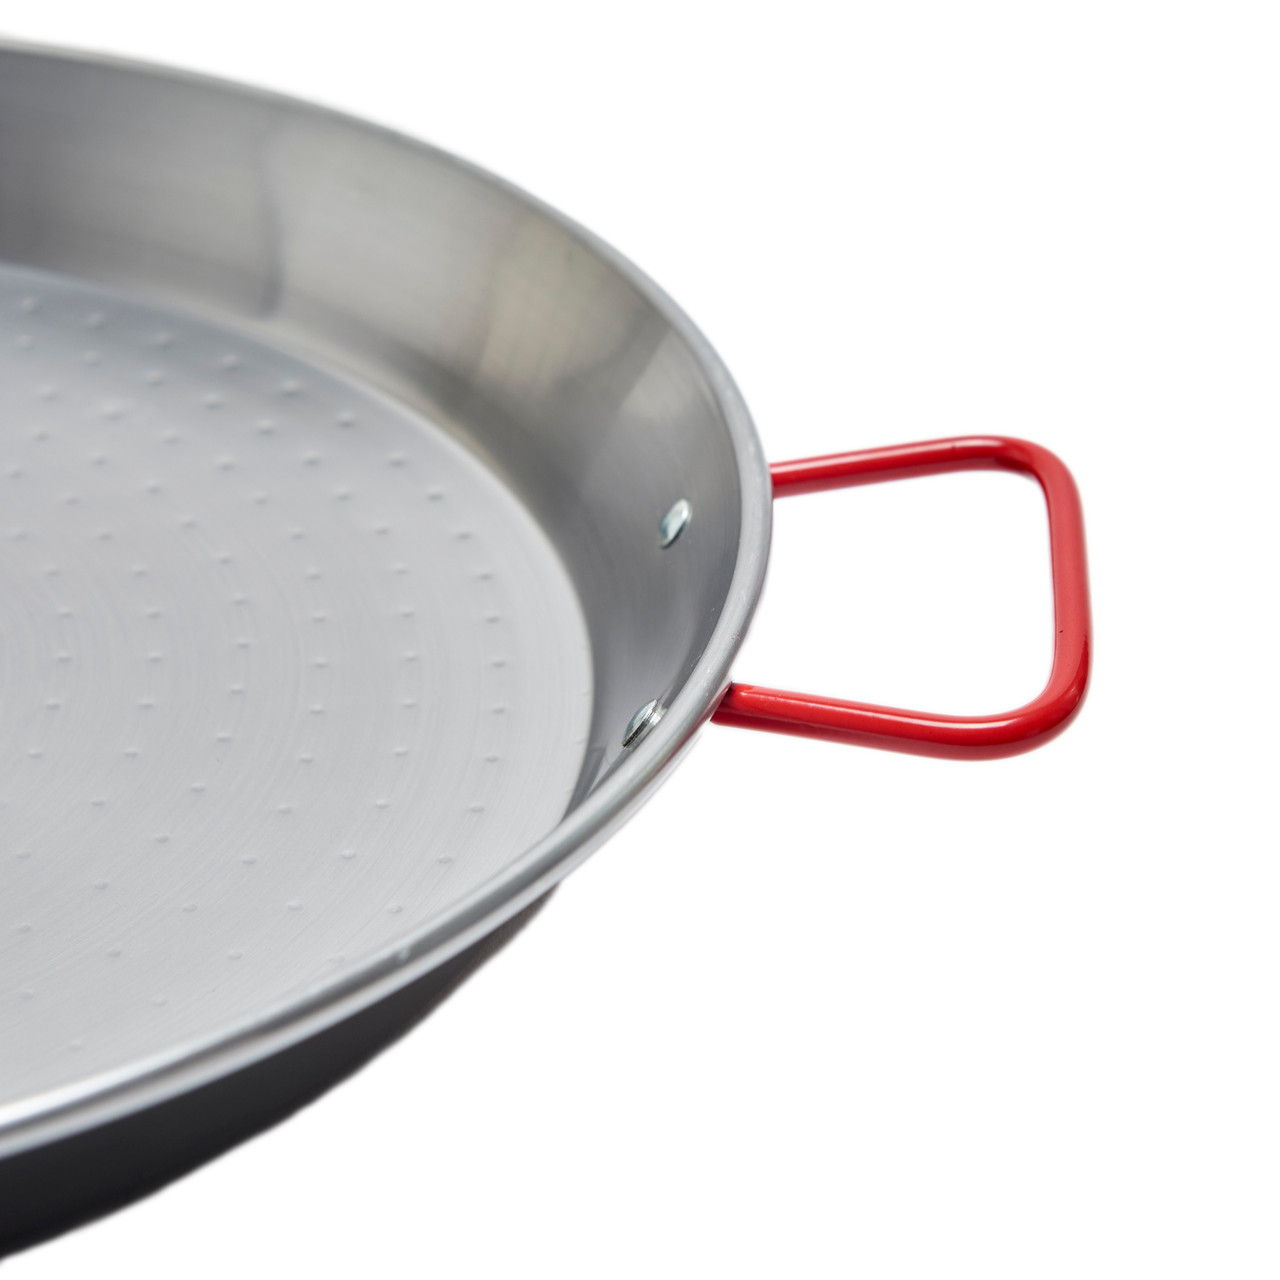  MAGEFESA® Carbon - paella pan 36 in - 91 cm for 37 Servings,  made in Carbon Steel, with dimples for greater resistance and lightness,  ideal for cooking outdoors, cook your own